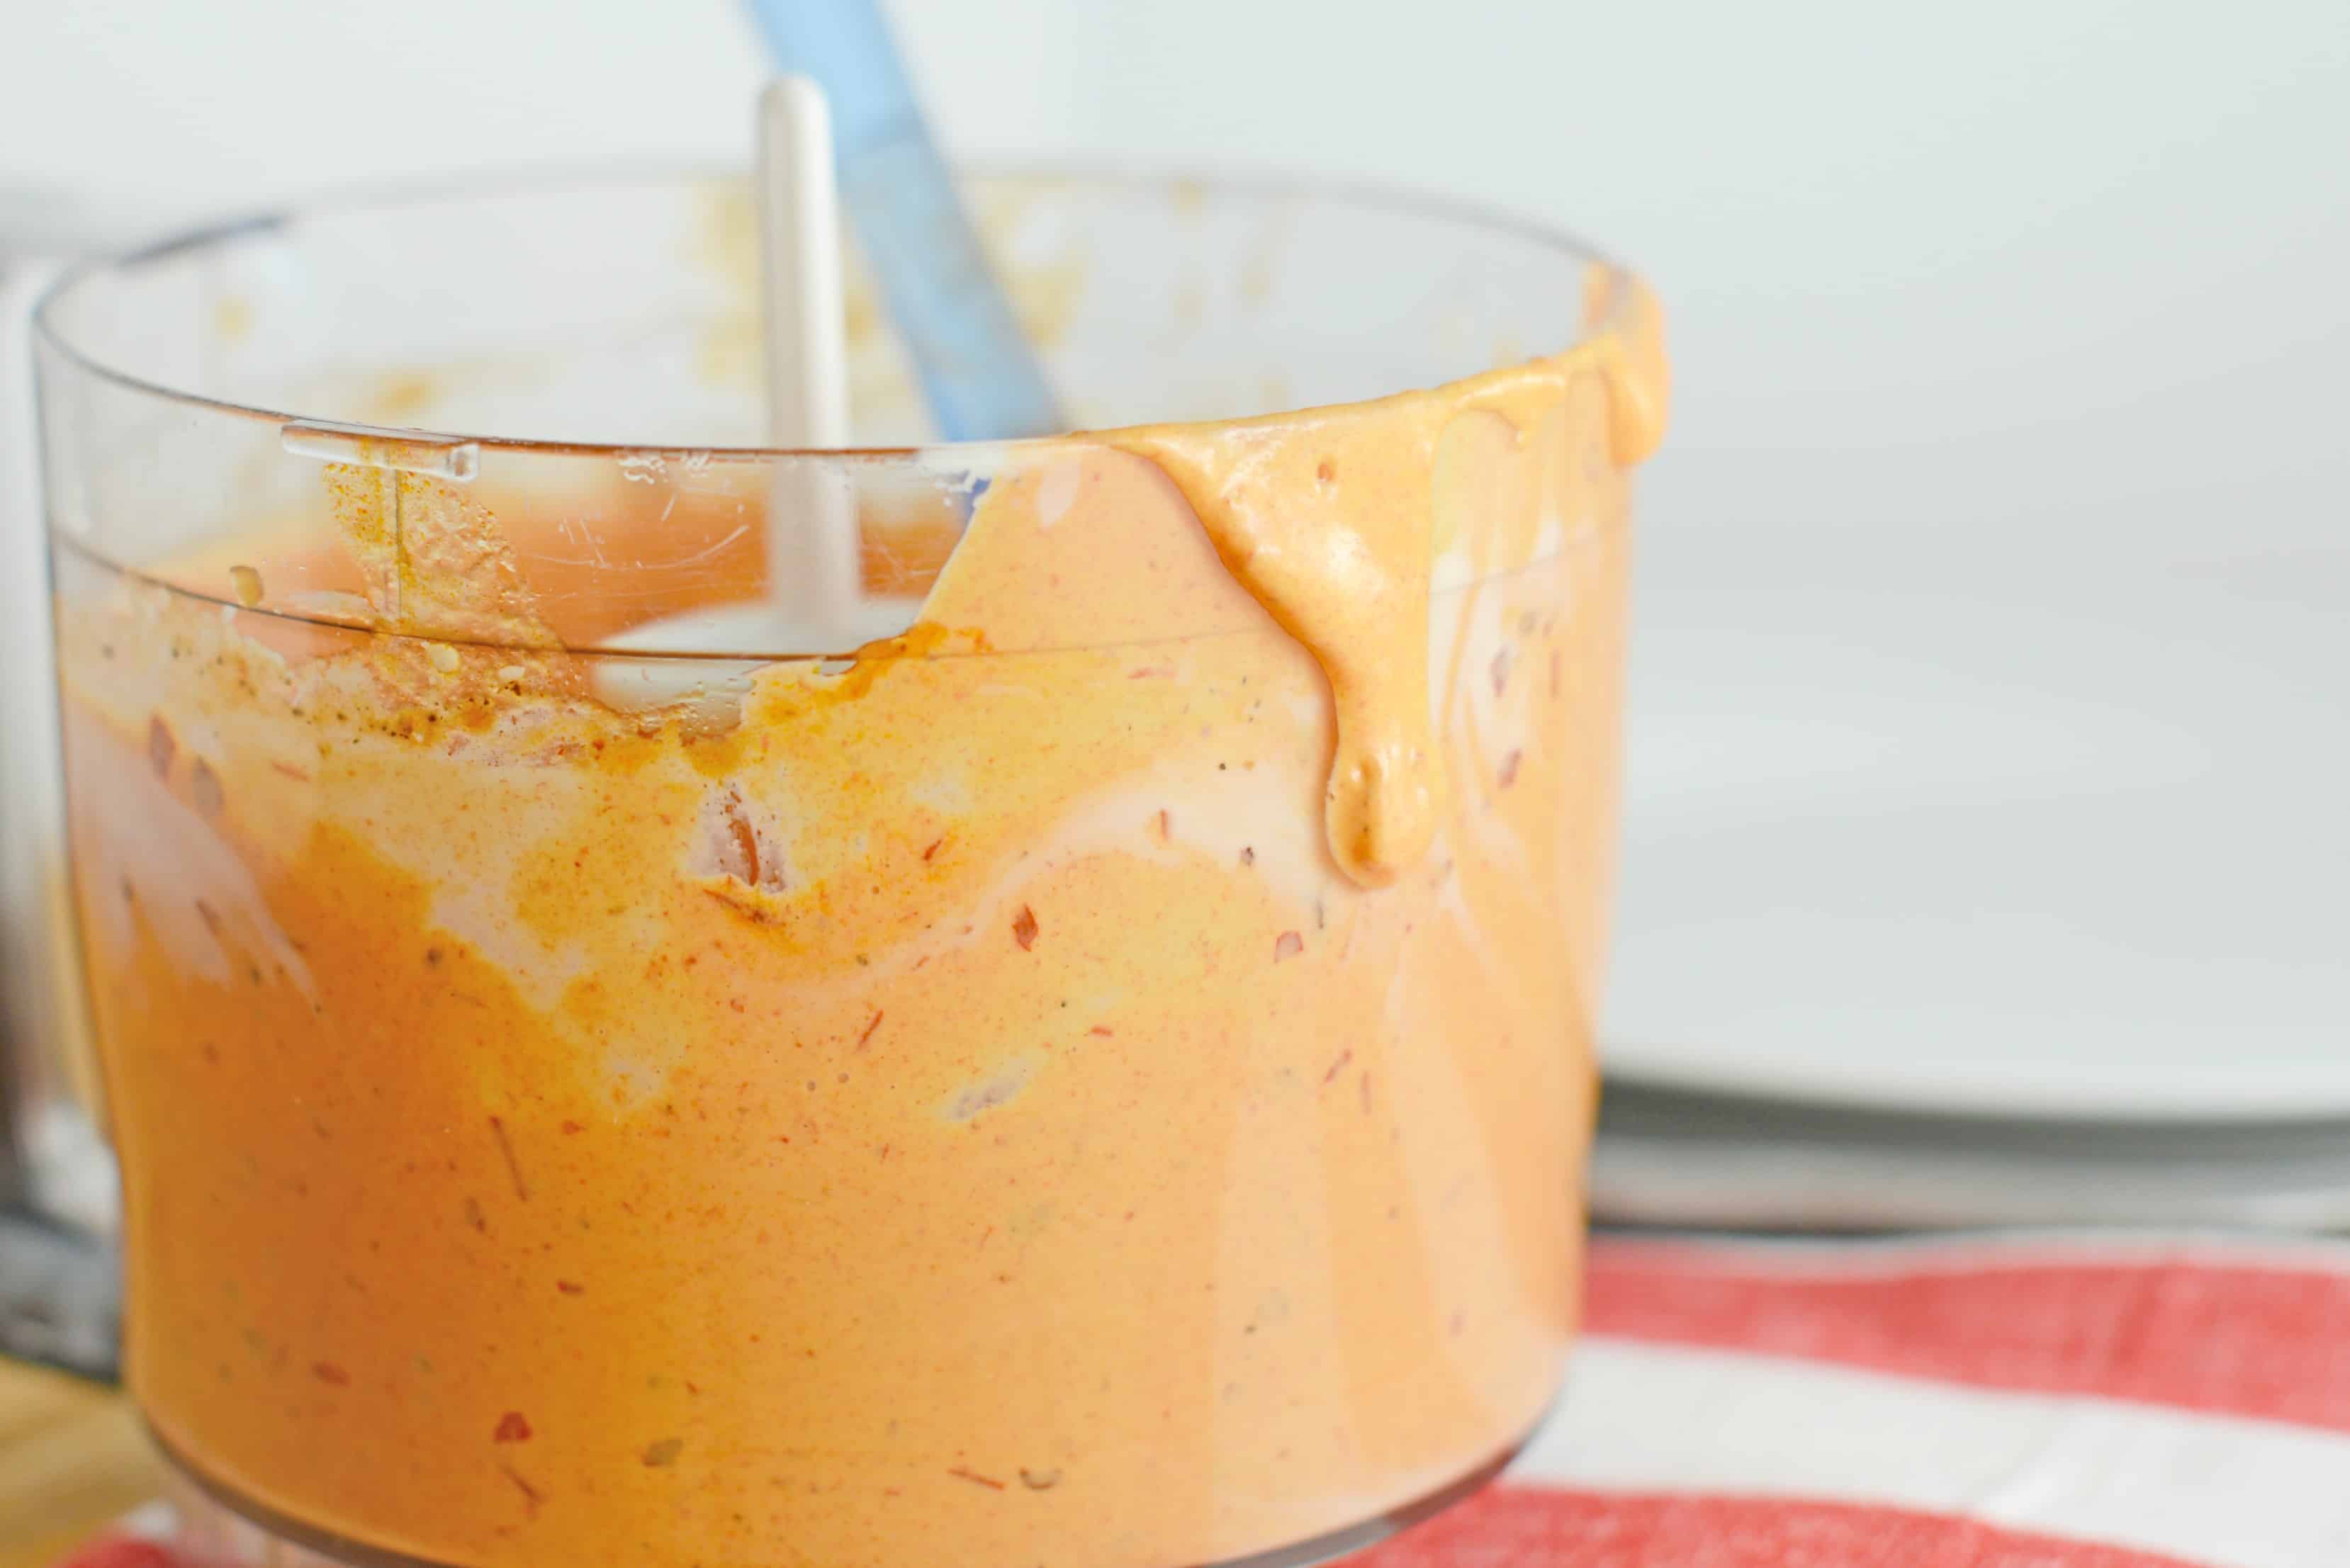 Creamy Chipotle Aioli is a quick and zesty sauce perfect for dipping or spreading on sandwiches.